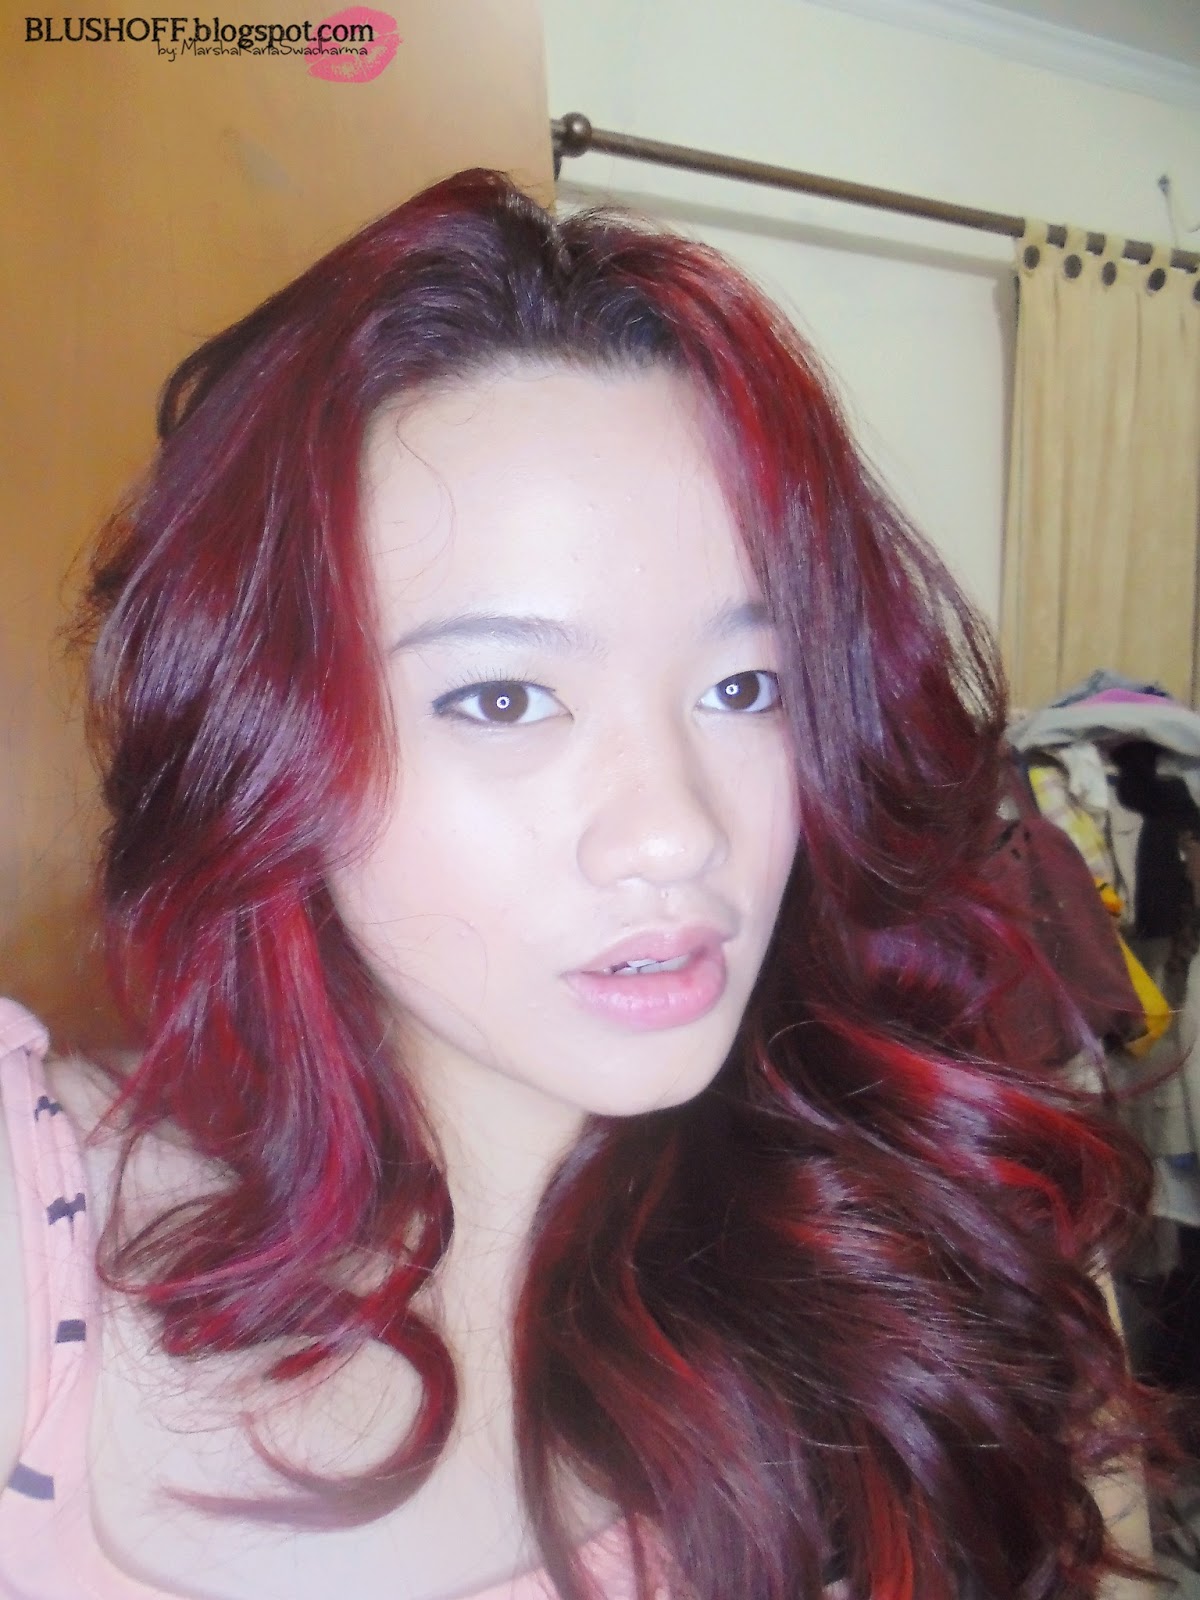 How to Maintain Colored Hair Red Hair Ep 3 BLUSHOFF